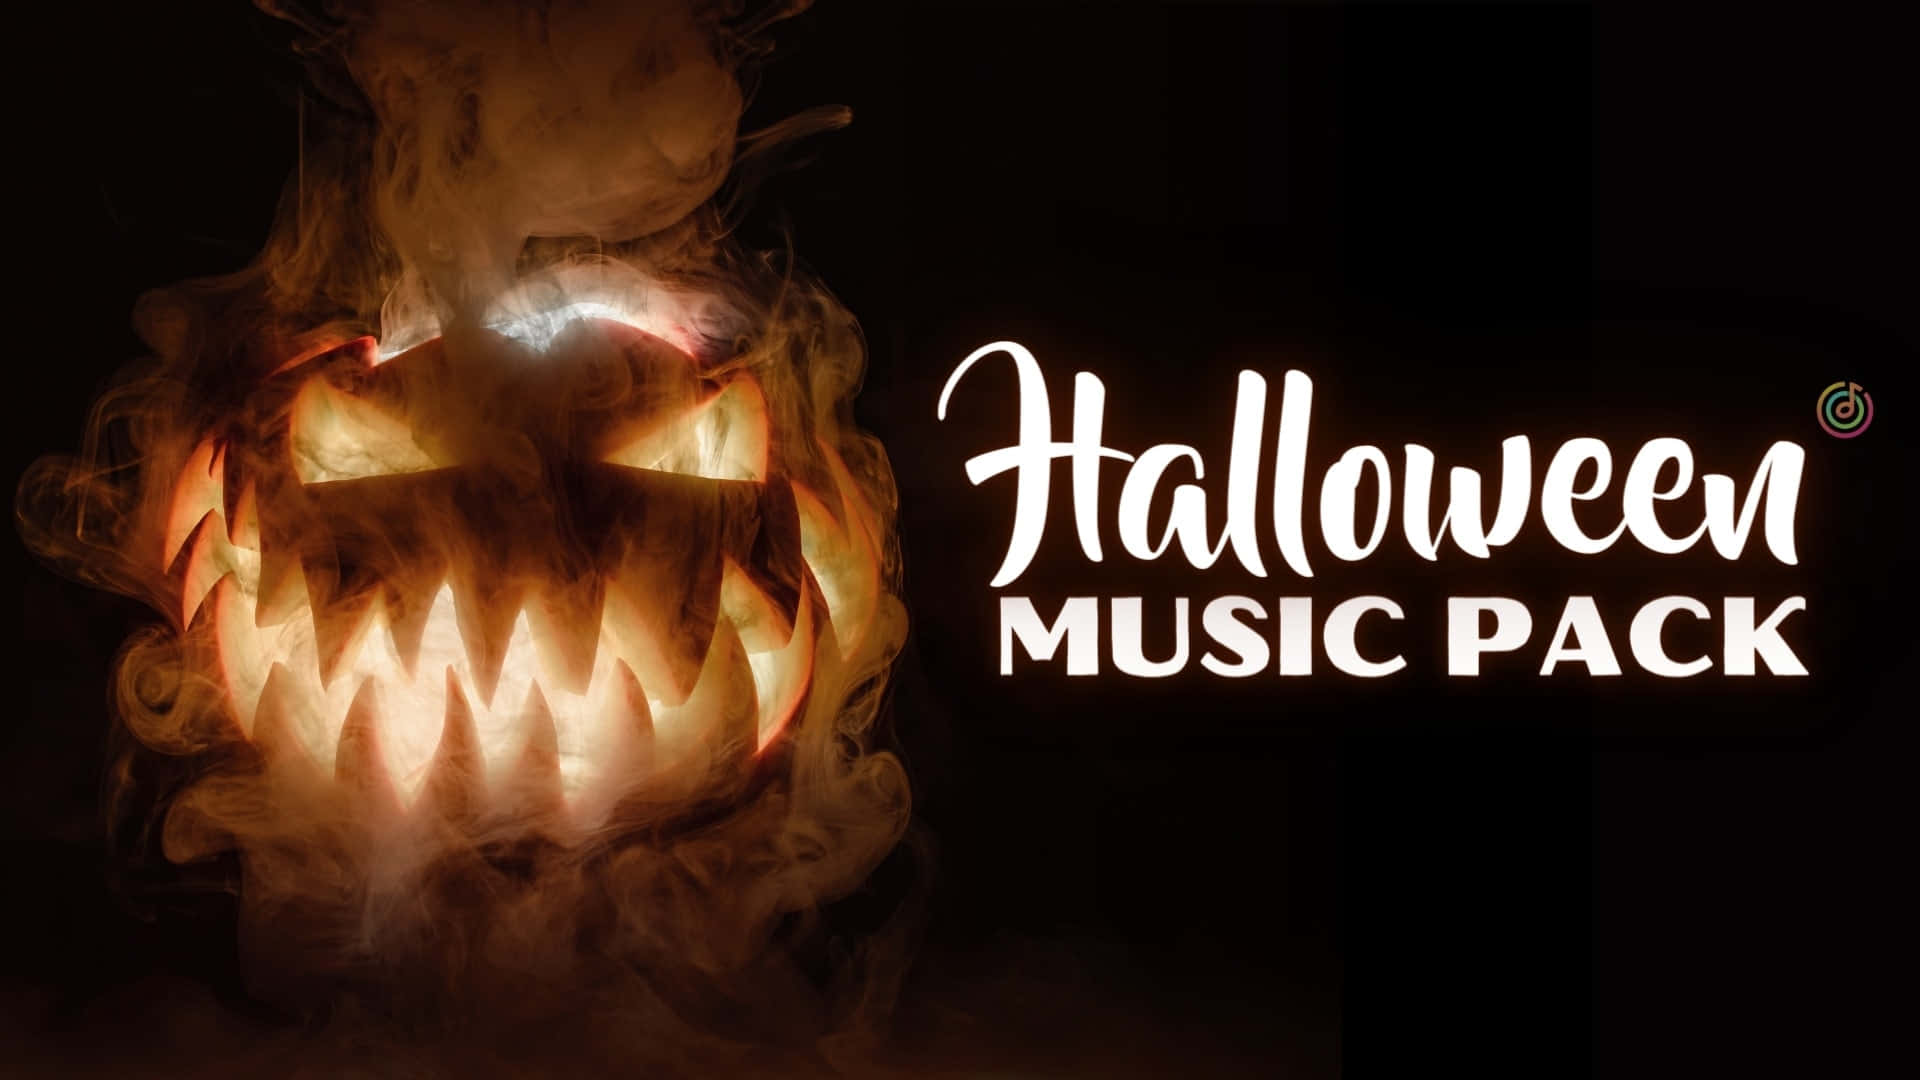 Download Spooky Halloween Night with Musical Instruments Wallpaper ...